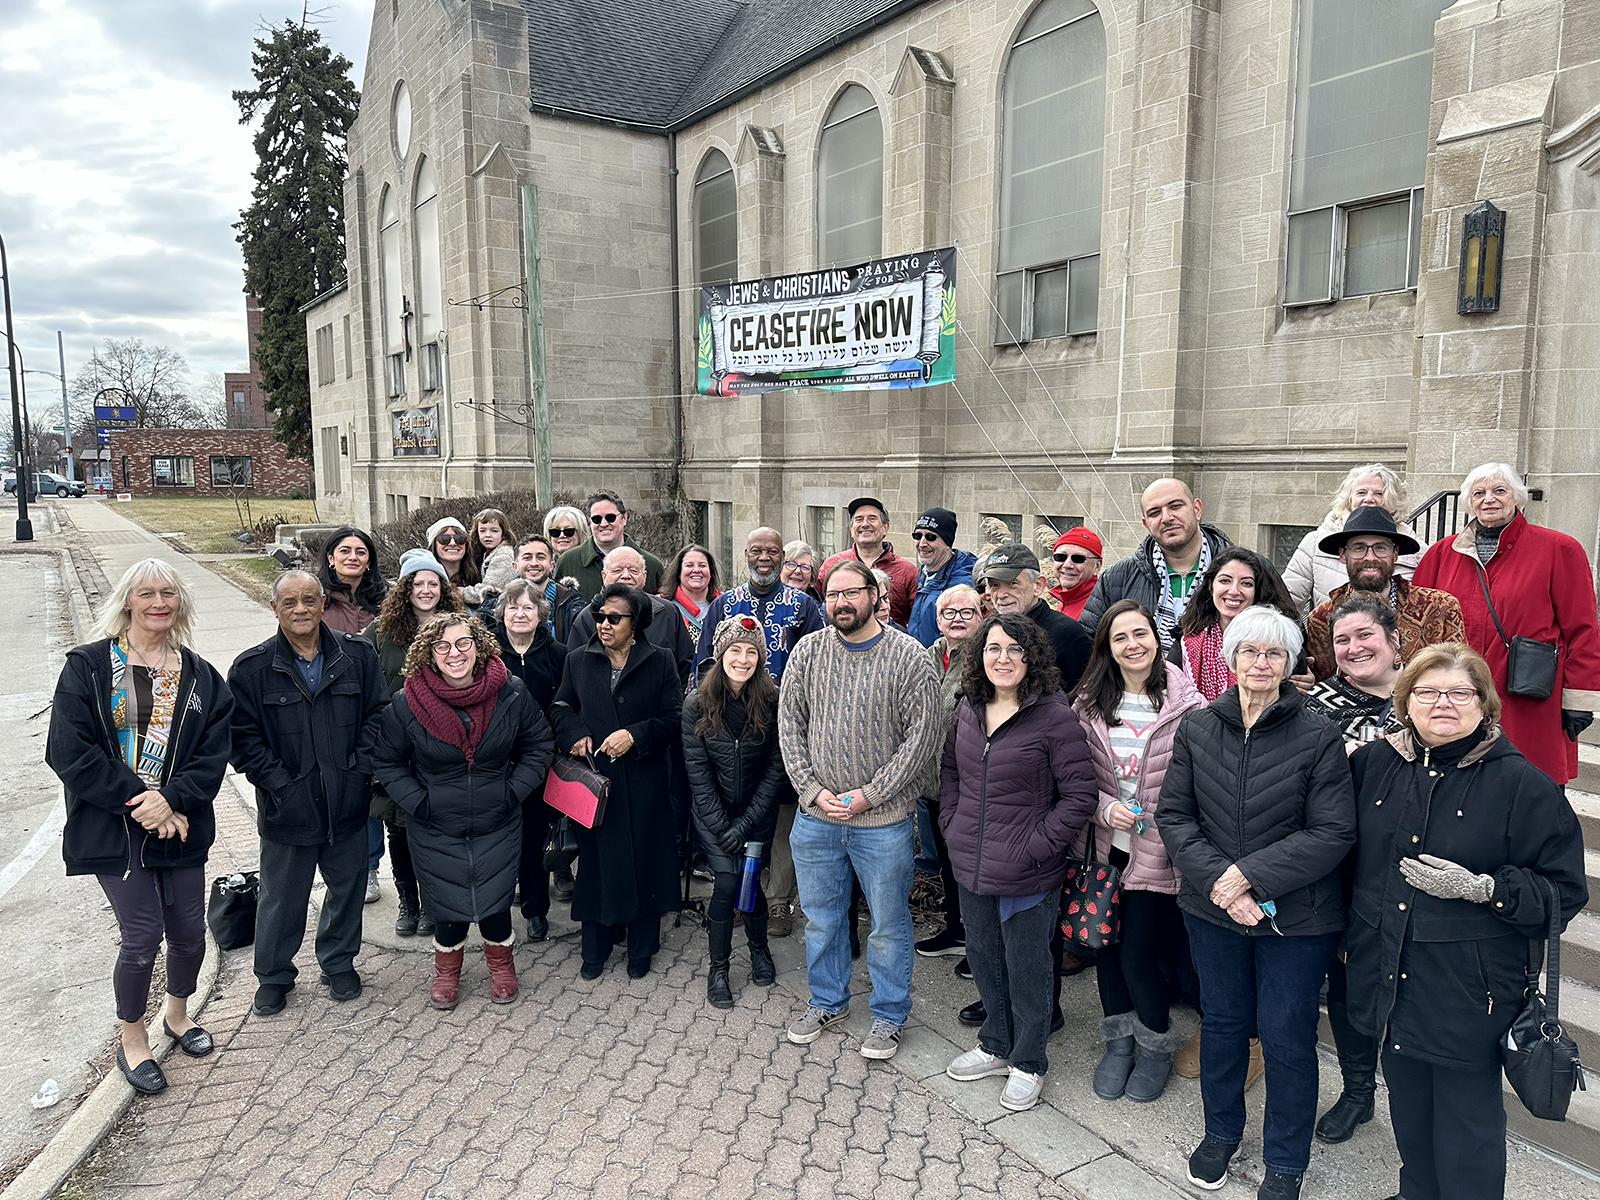 A new banner outside First United Methodist Church of Ferndale, Michigan, reads ‘Jews and Christians praying for ceasefire now.’ The church is also the home of Congregation T’chiyah, a Jewish synagogue led by Rabbi Alana Alpert. (Courtesy photo)